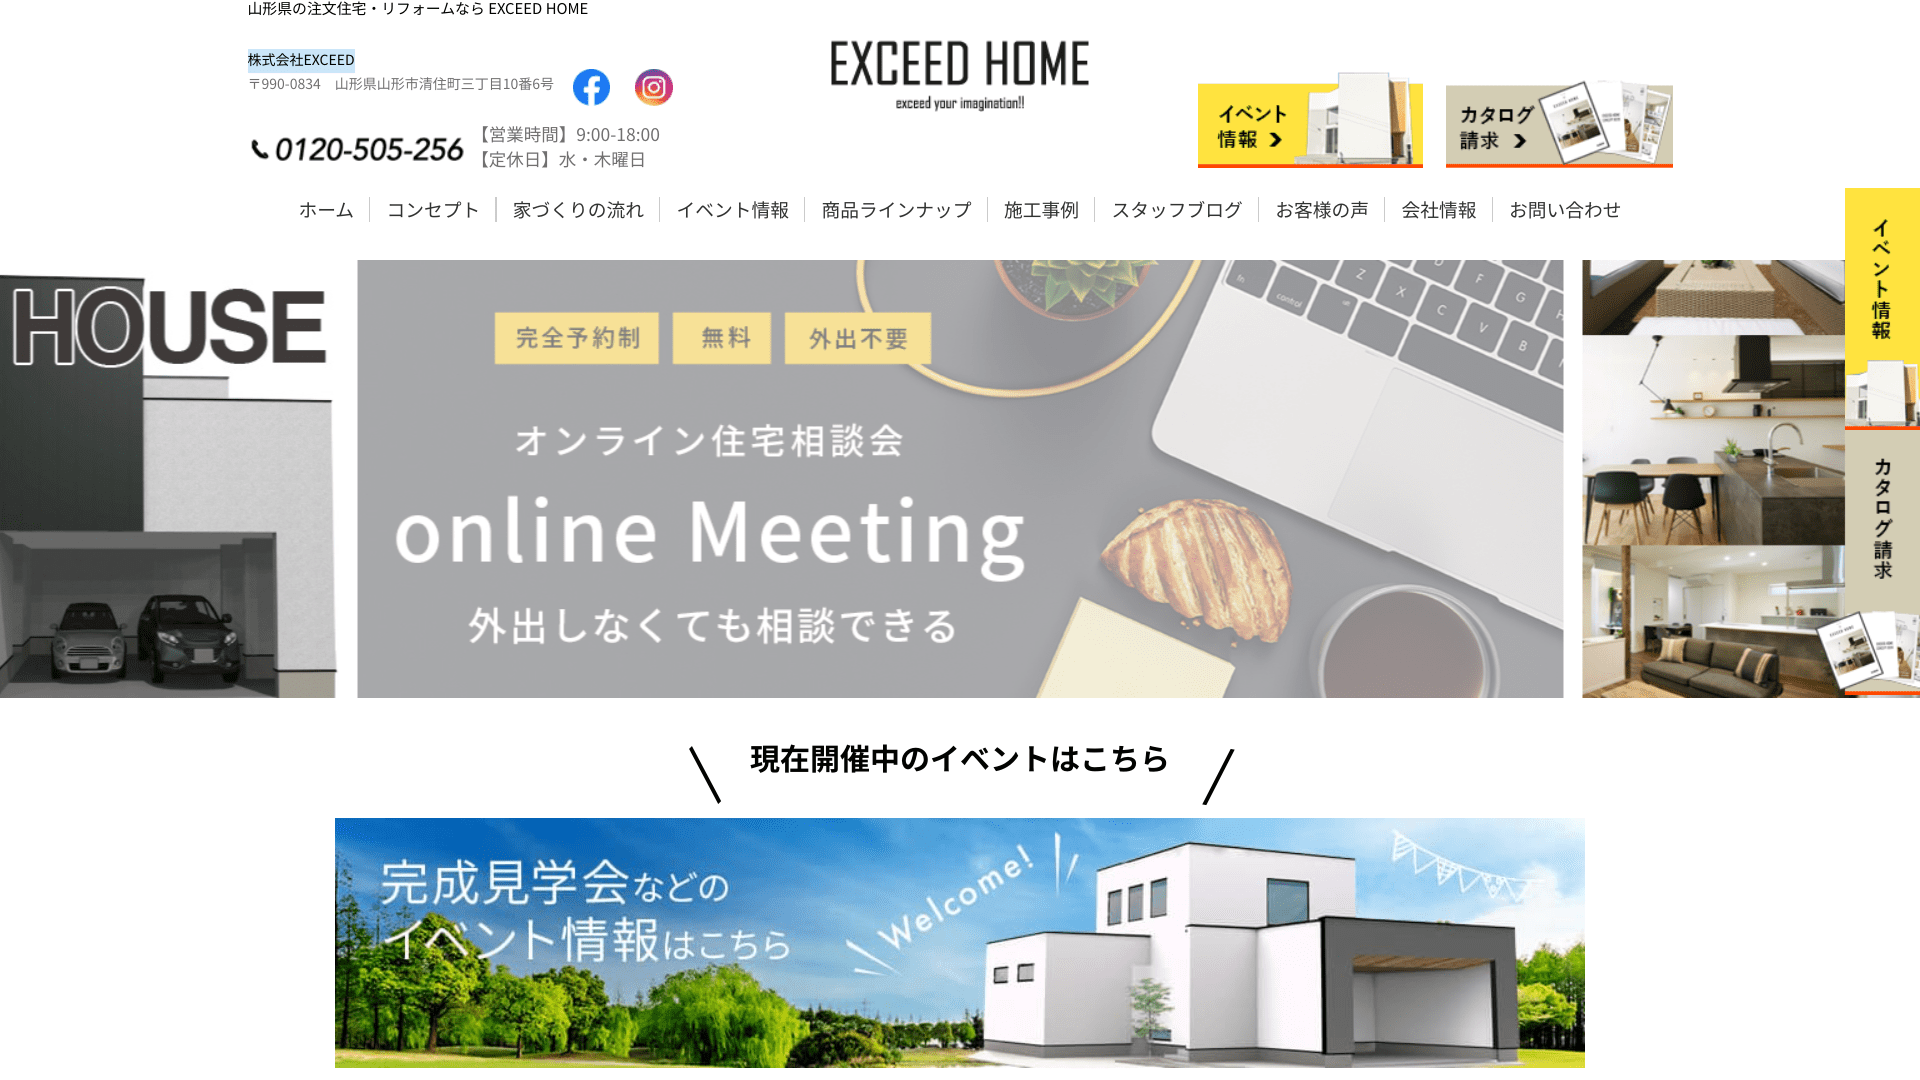 EXCEED HOME(株式会社EXCEED)